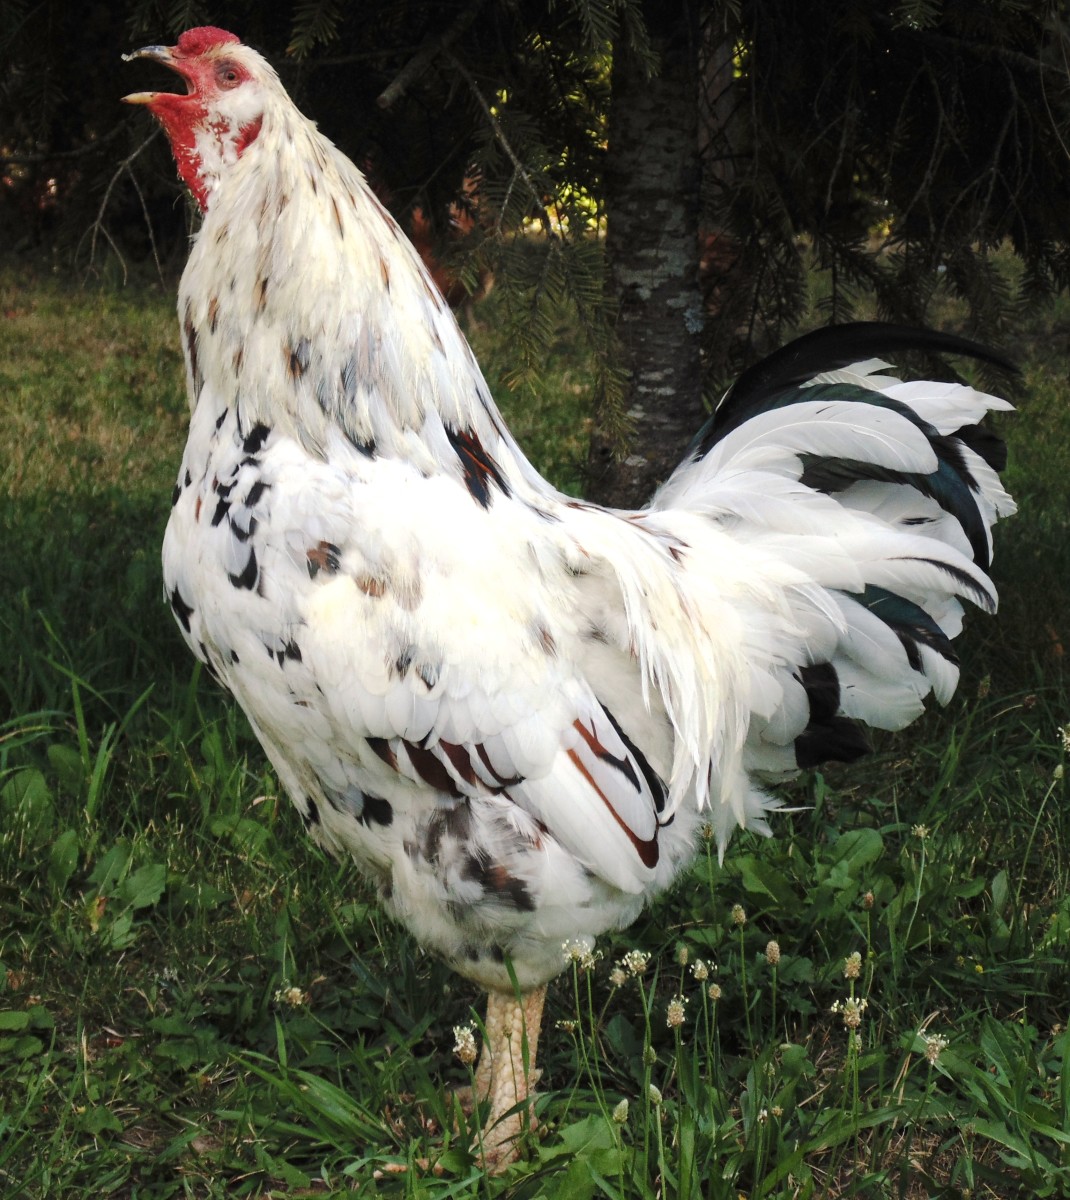 My Rooster... the king and protector of my small flock of hens.